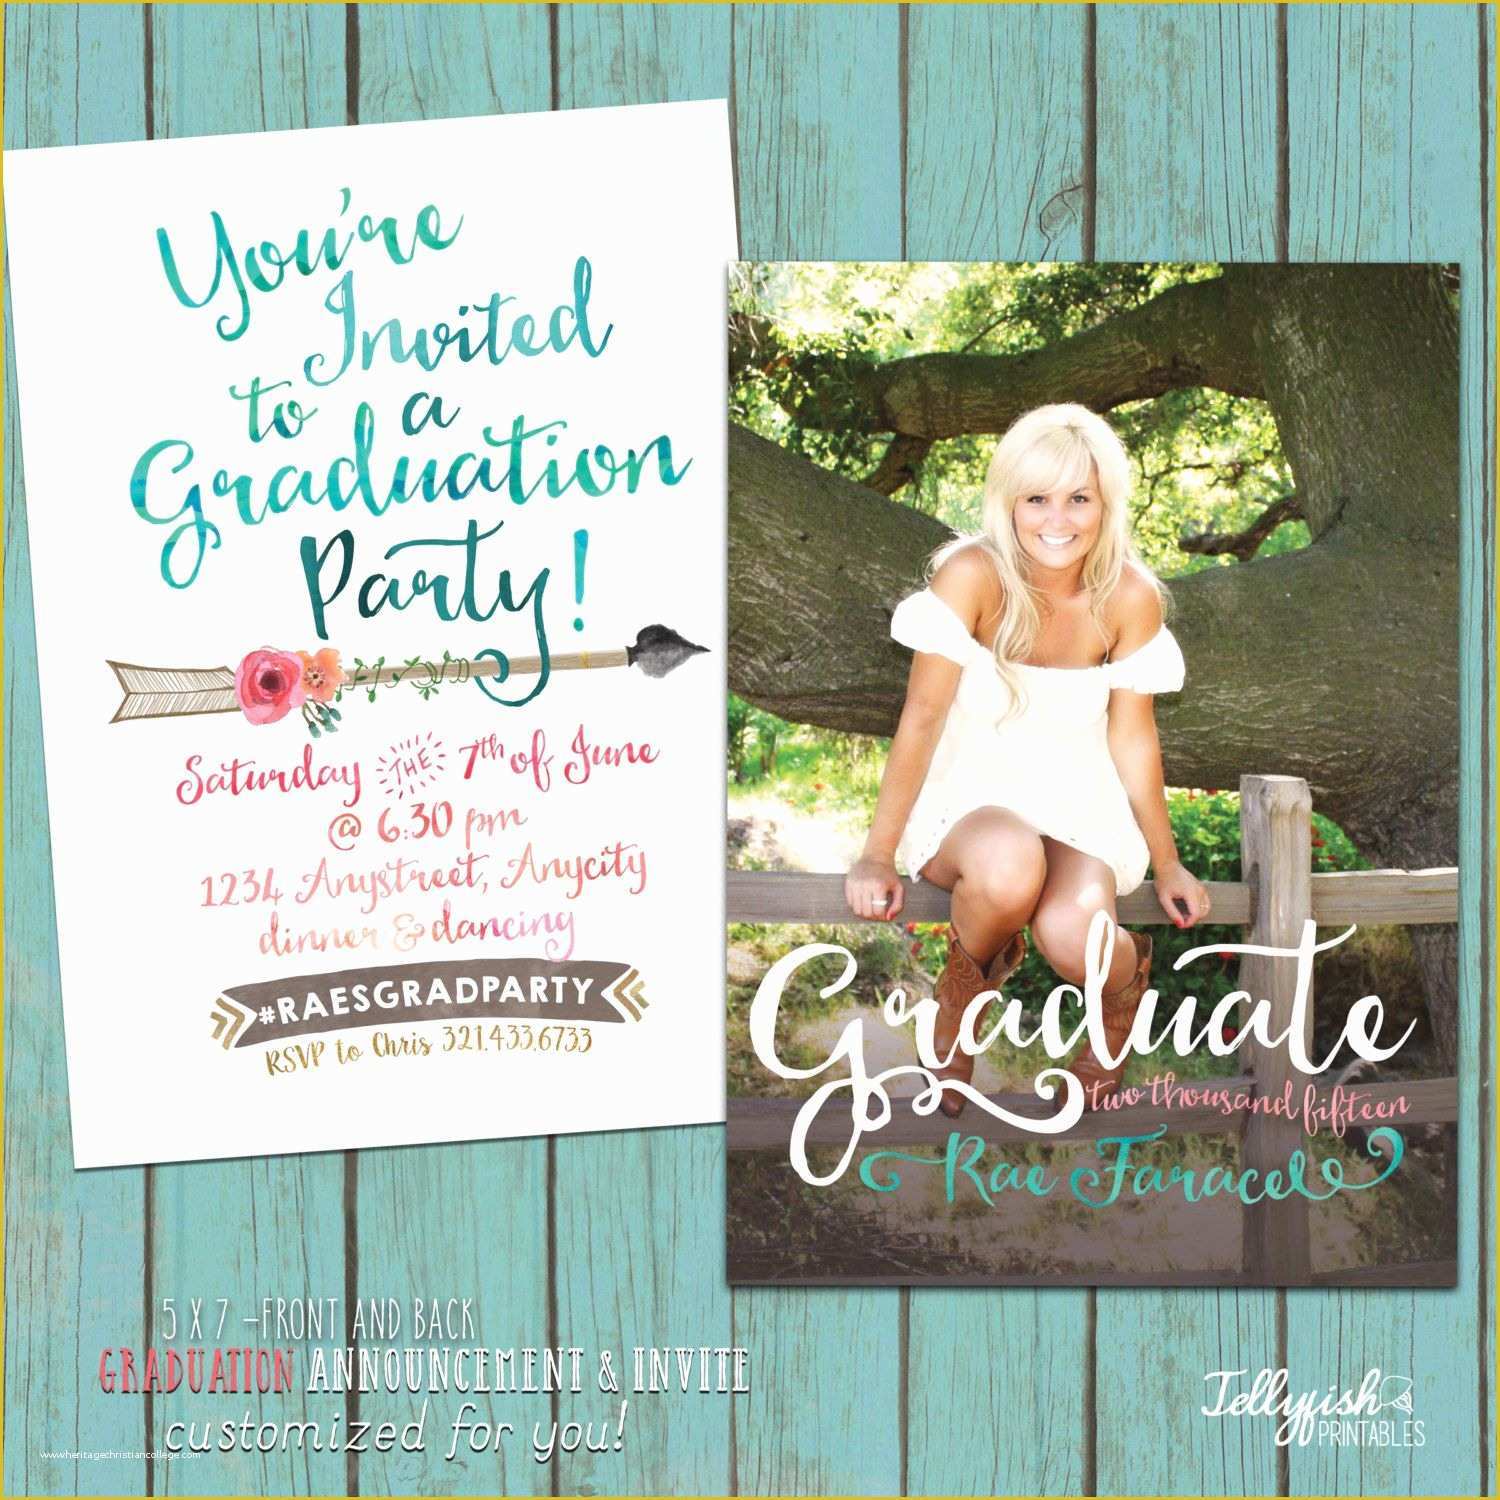 Free Graduation Announcements Templates Of Graduation Invitation Template Graduation Invitation